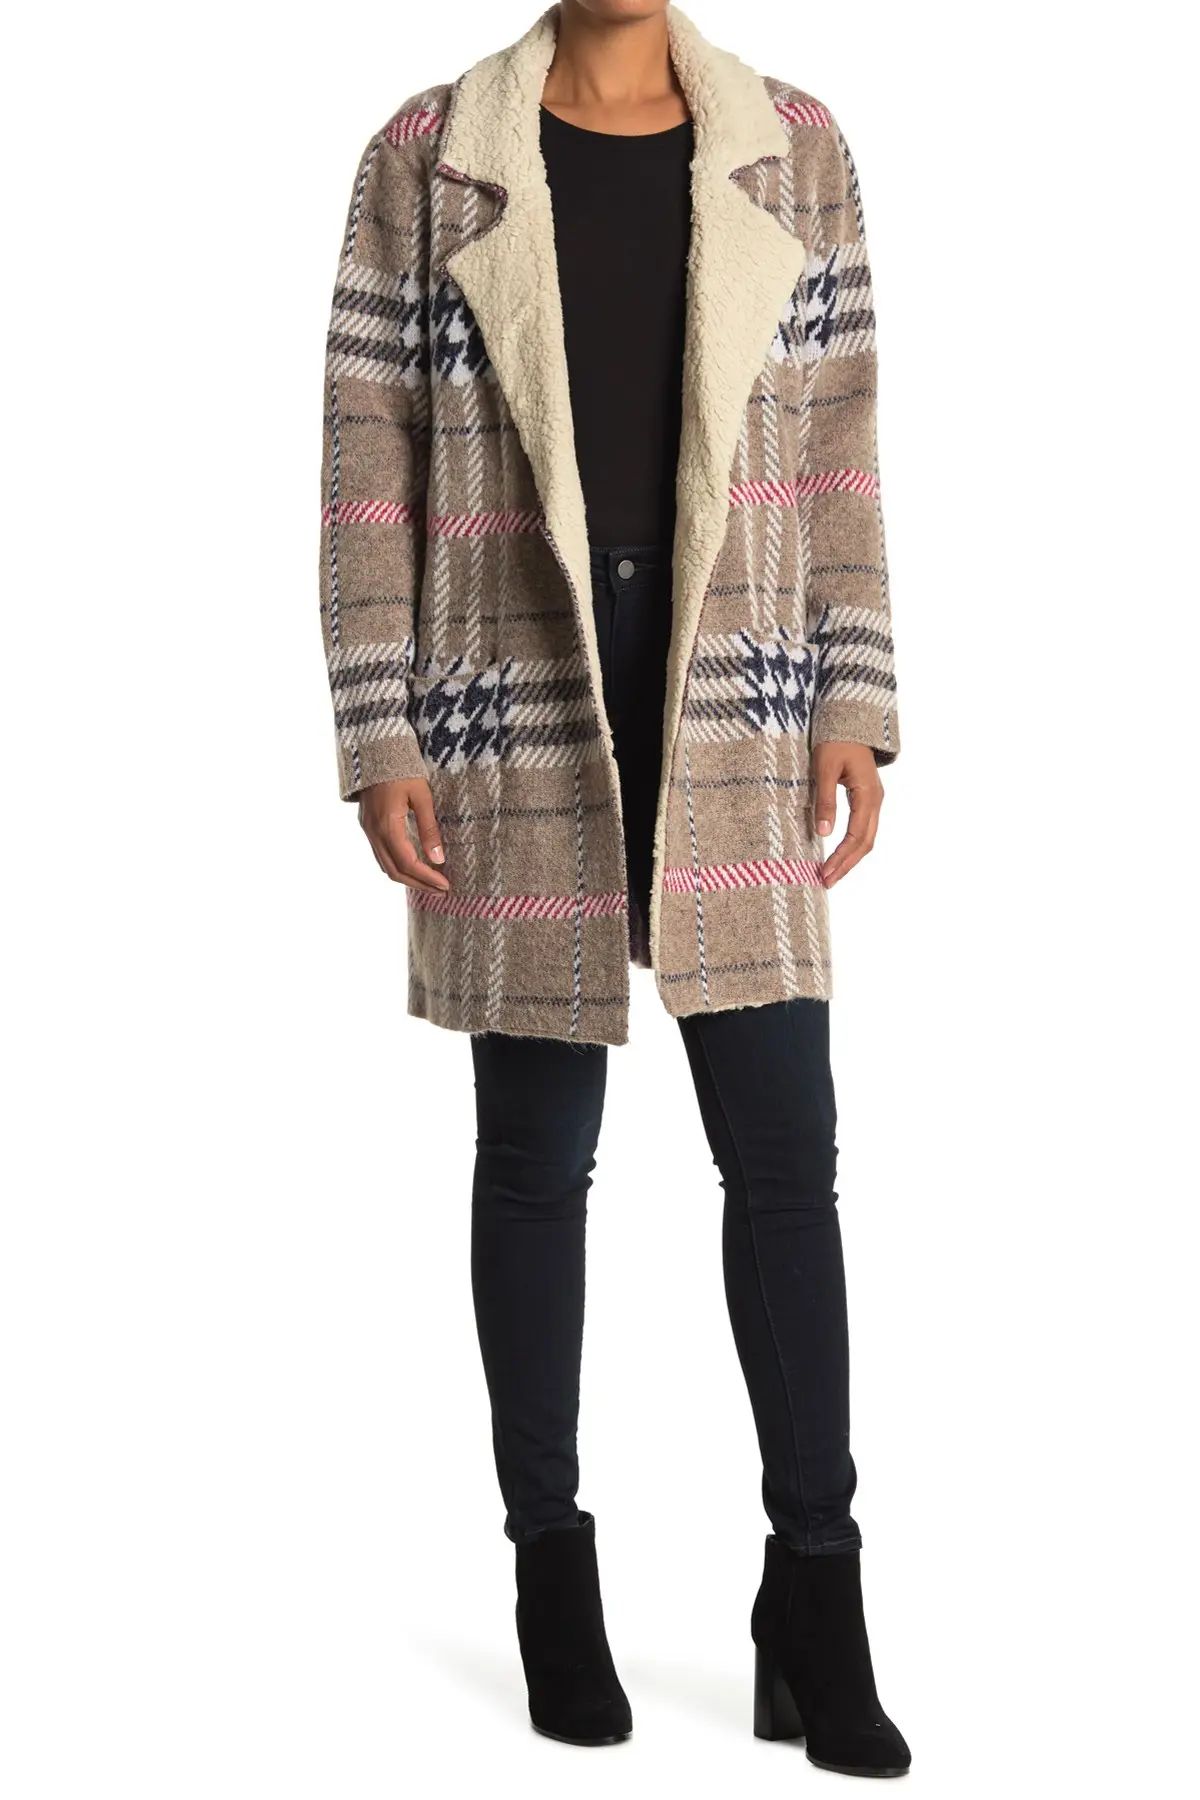 Cyrus Plaid Print Faux Shearling Lined Coat at Nordstrom Rack | Nordstrom Rack